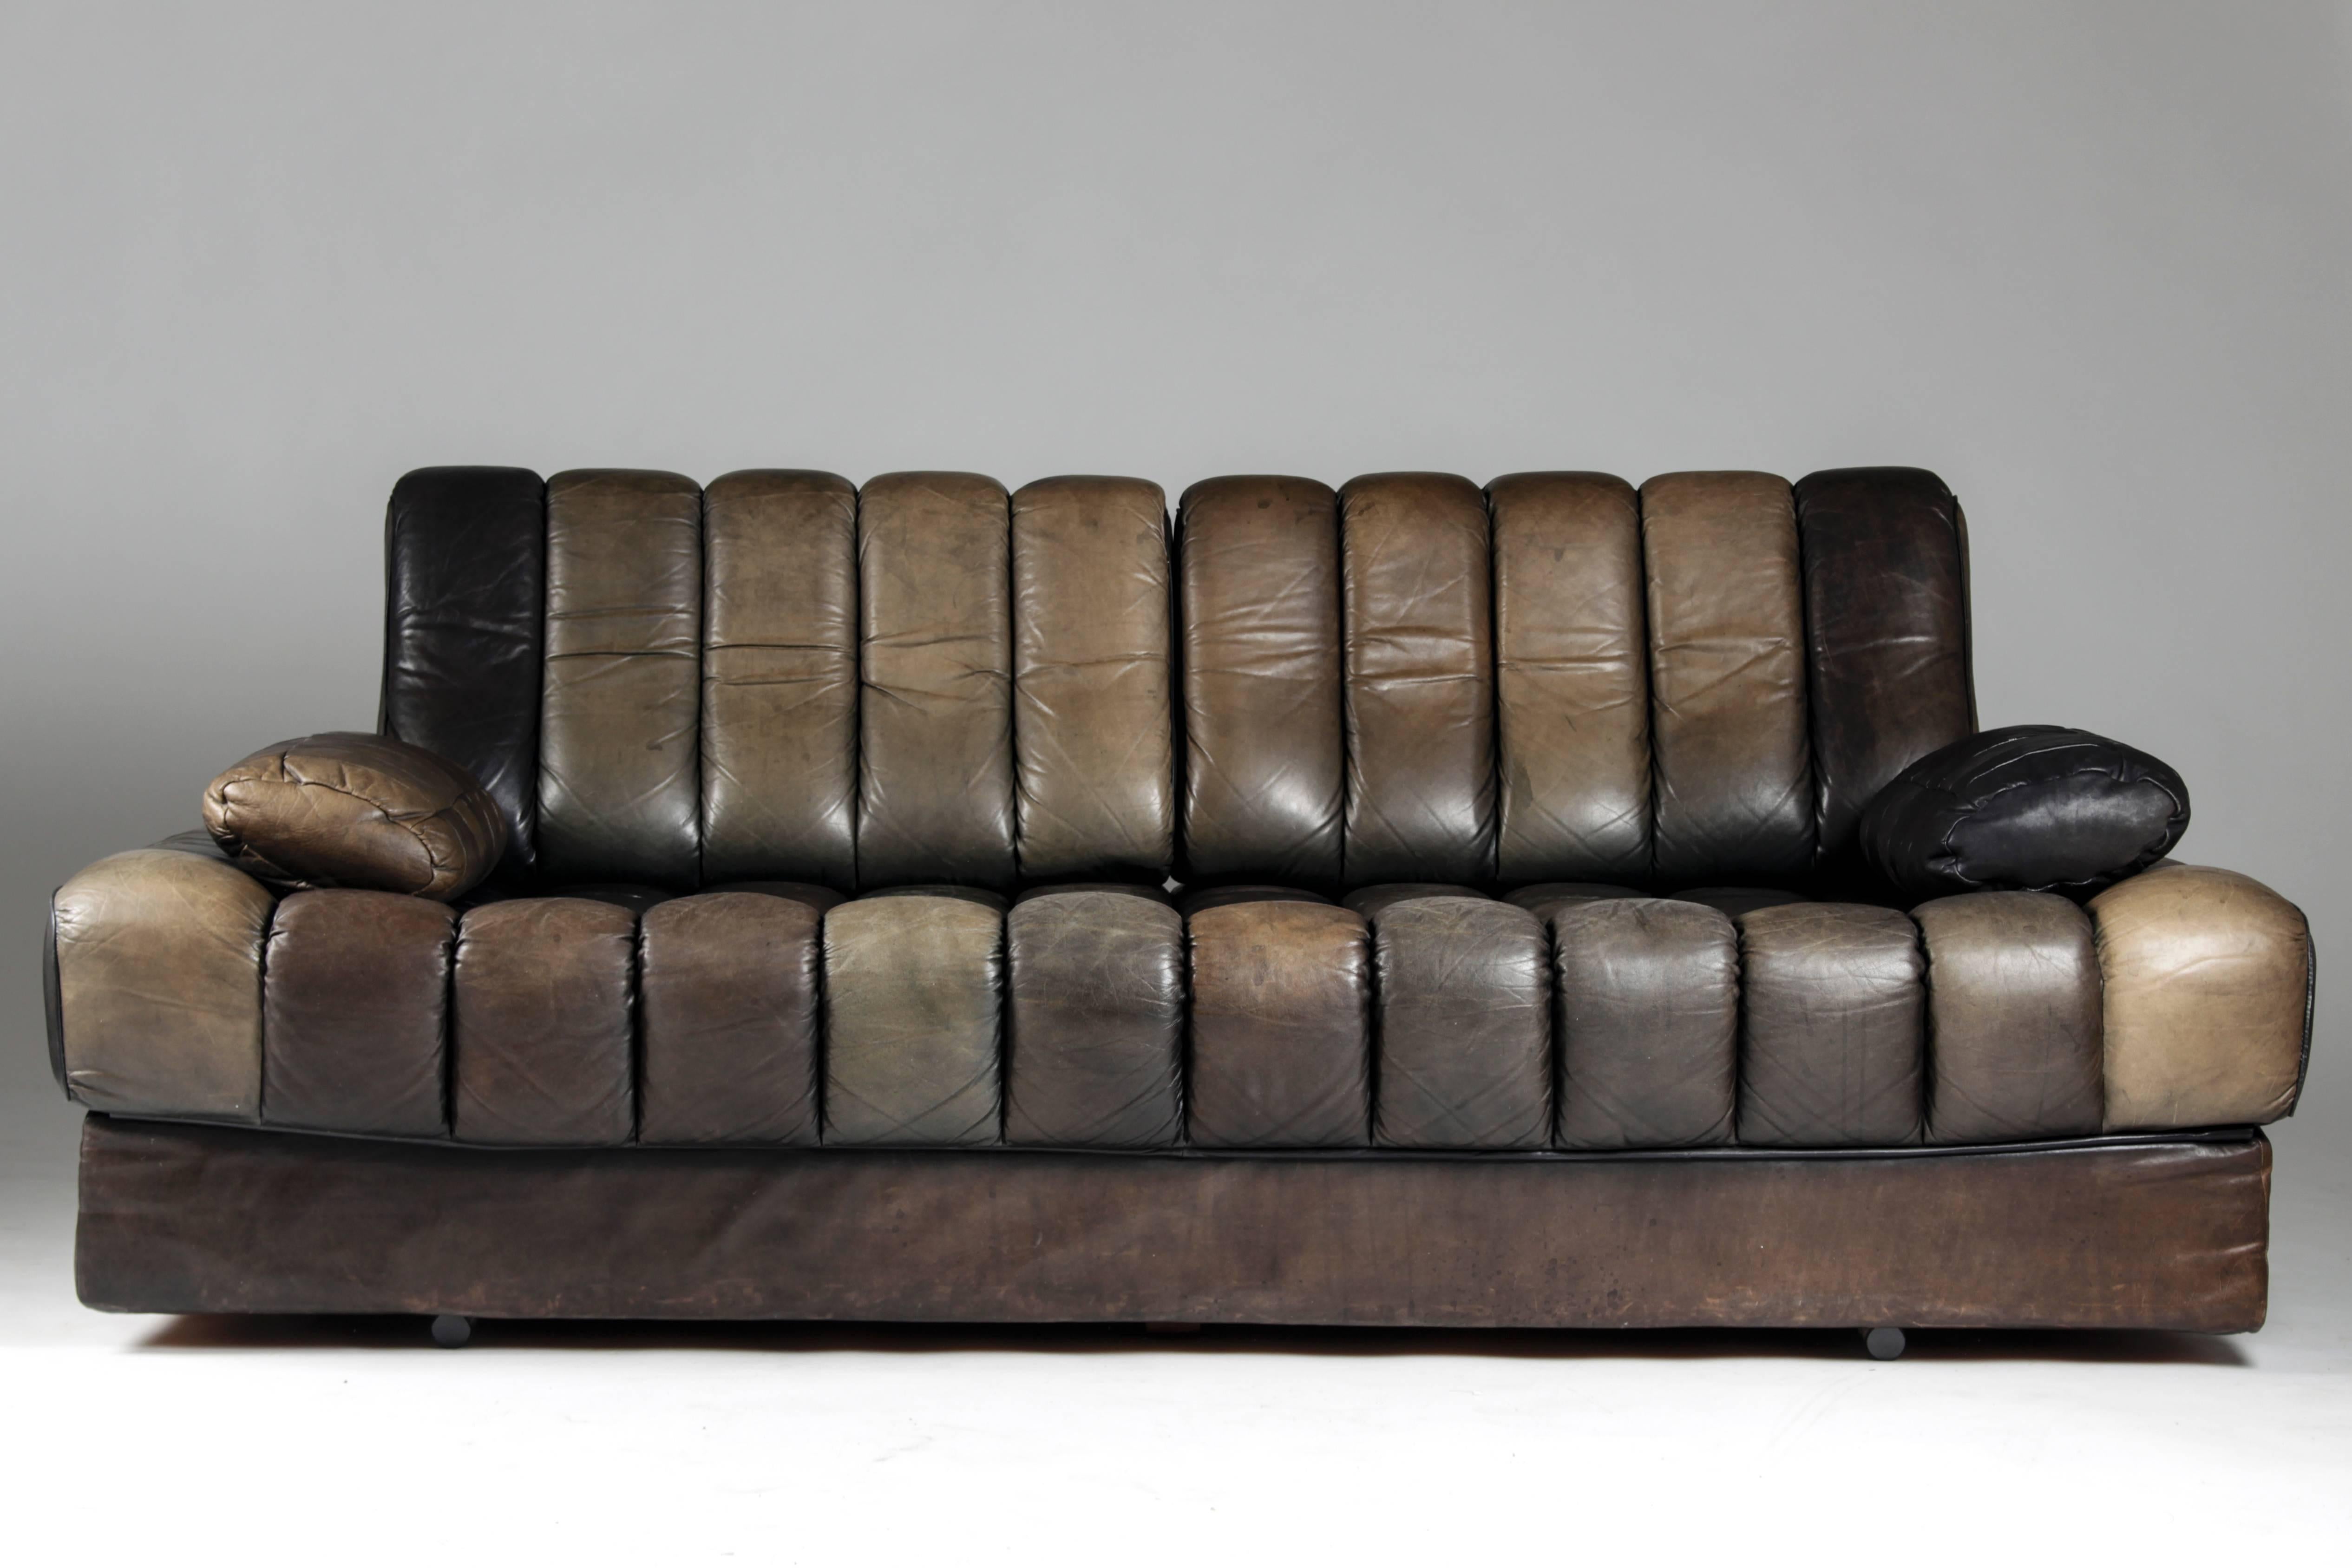 Top quality sofa and daybed by De Sede. This sofa is in great vintage condition. It shows a perfect patina with the partly bleached leather, giving the sofa an extraordinary color scheme. The sofa has been professionally cleaned and reconditioned.